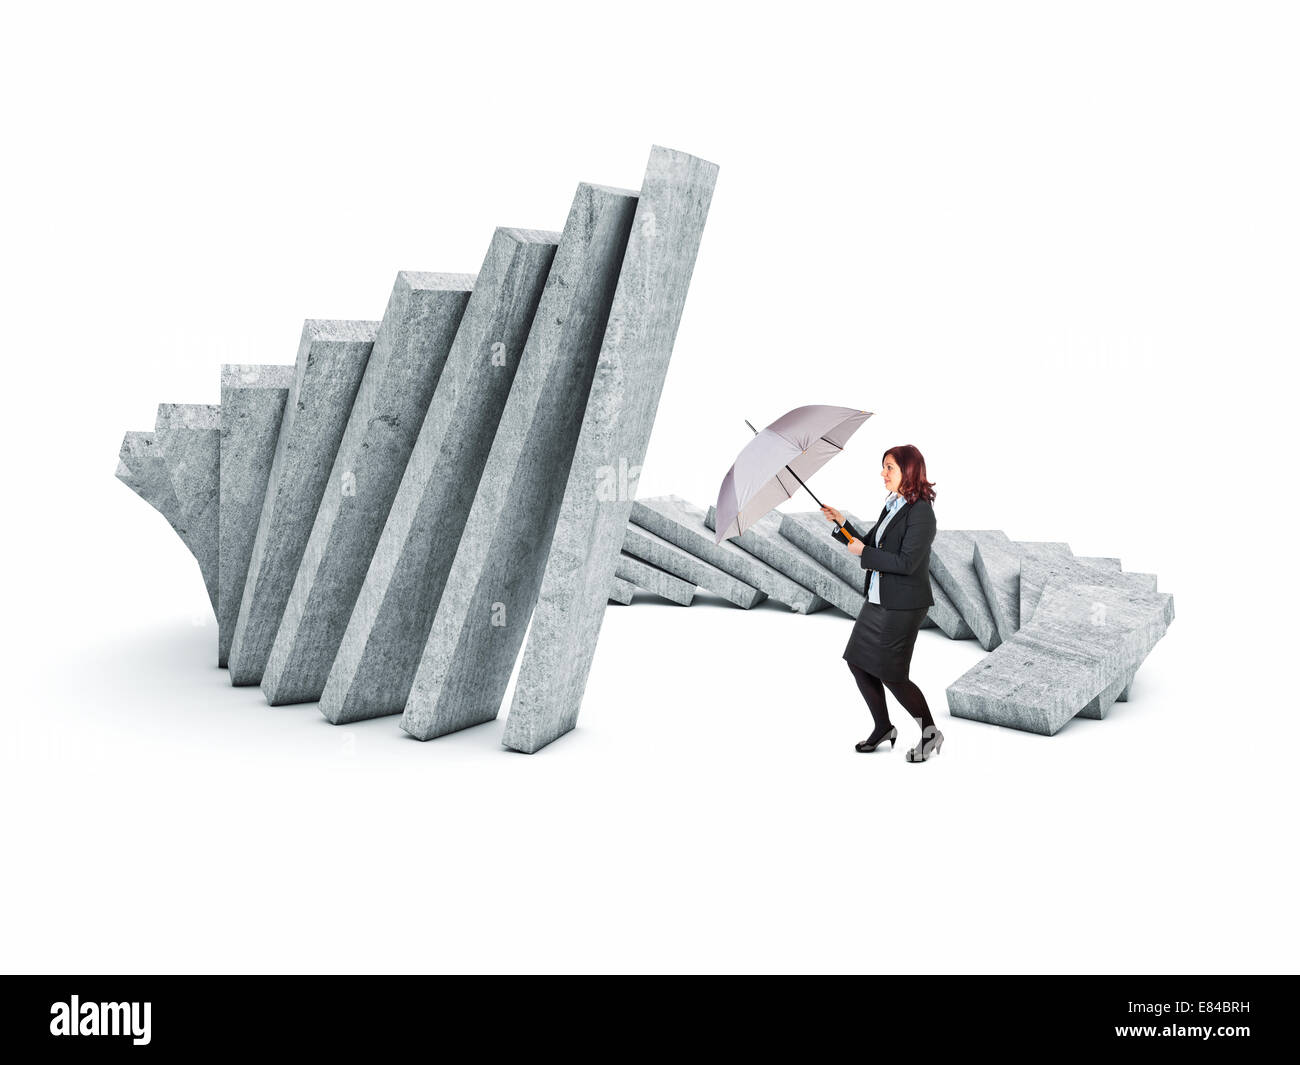 falling walls and woman with umbrella Stock Photo